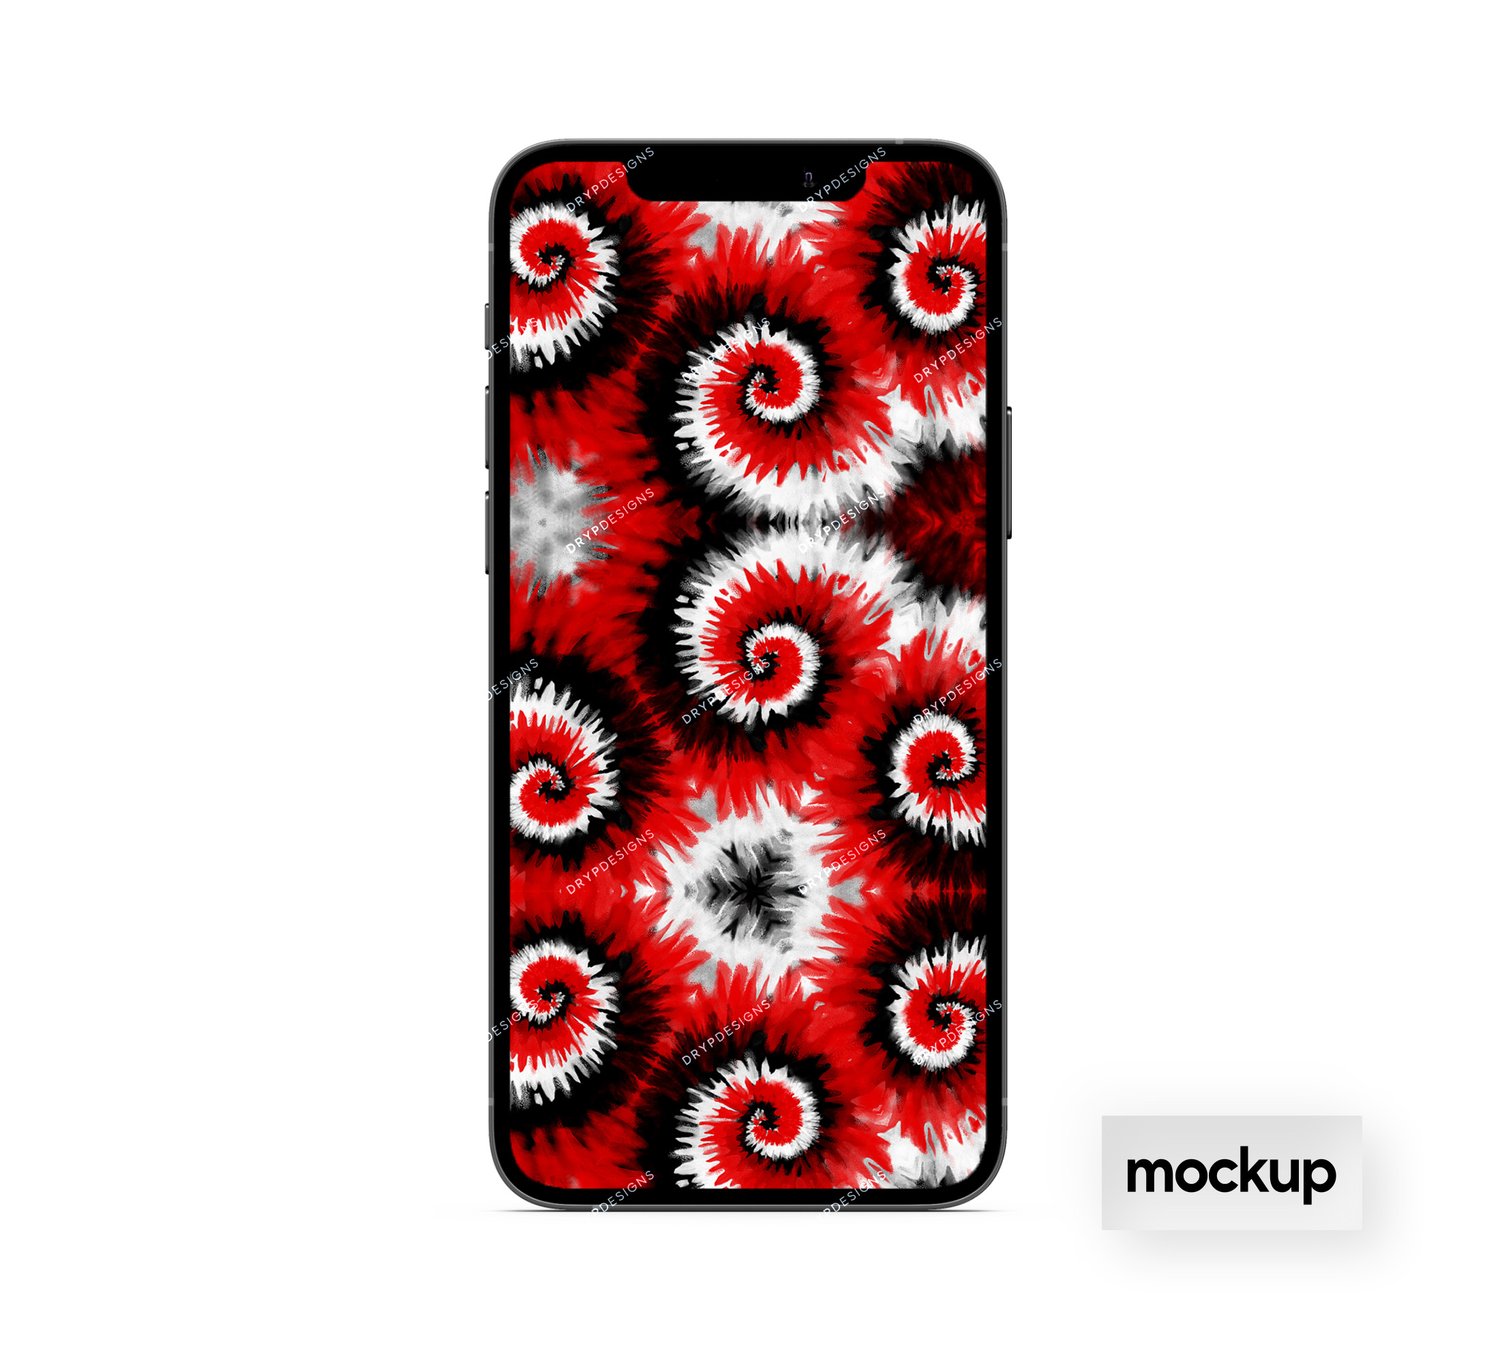 Black + Red Marble Swirl Seamless Background — drypdesigns